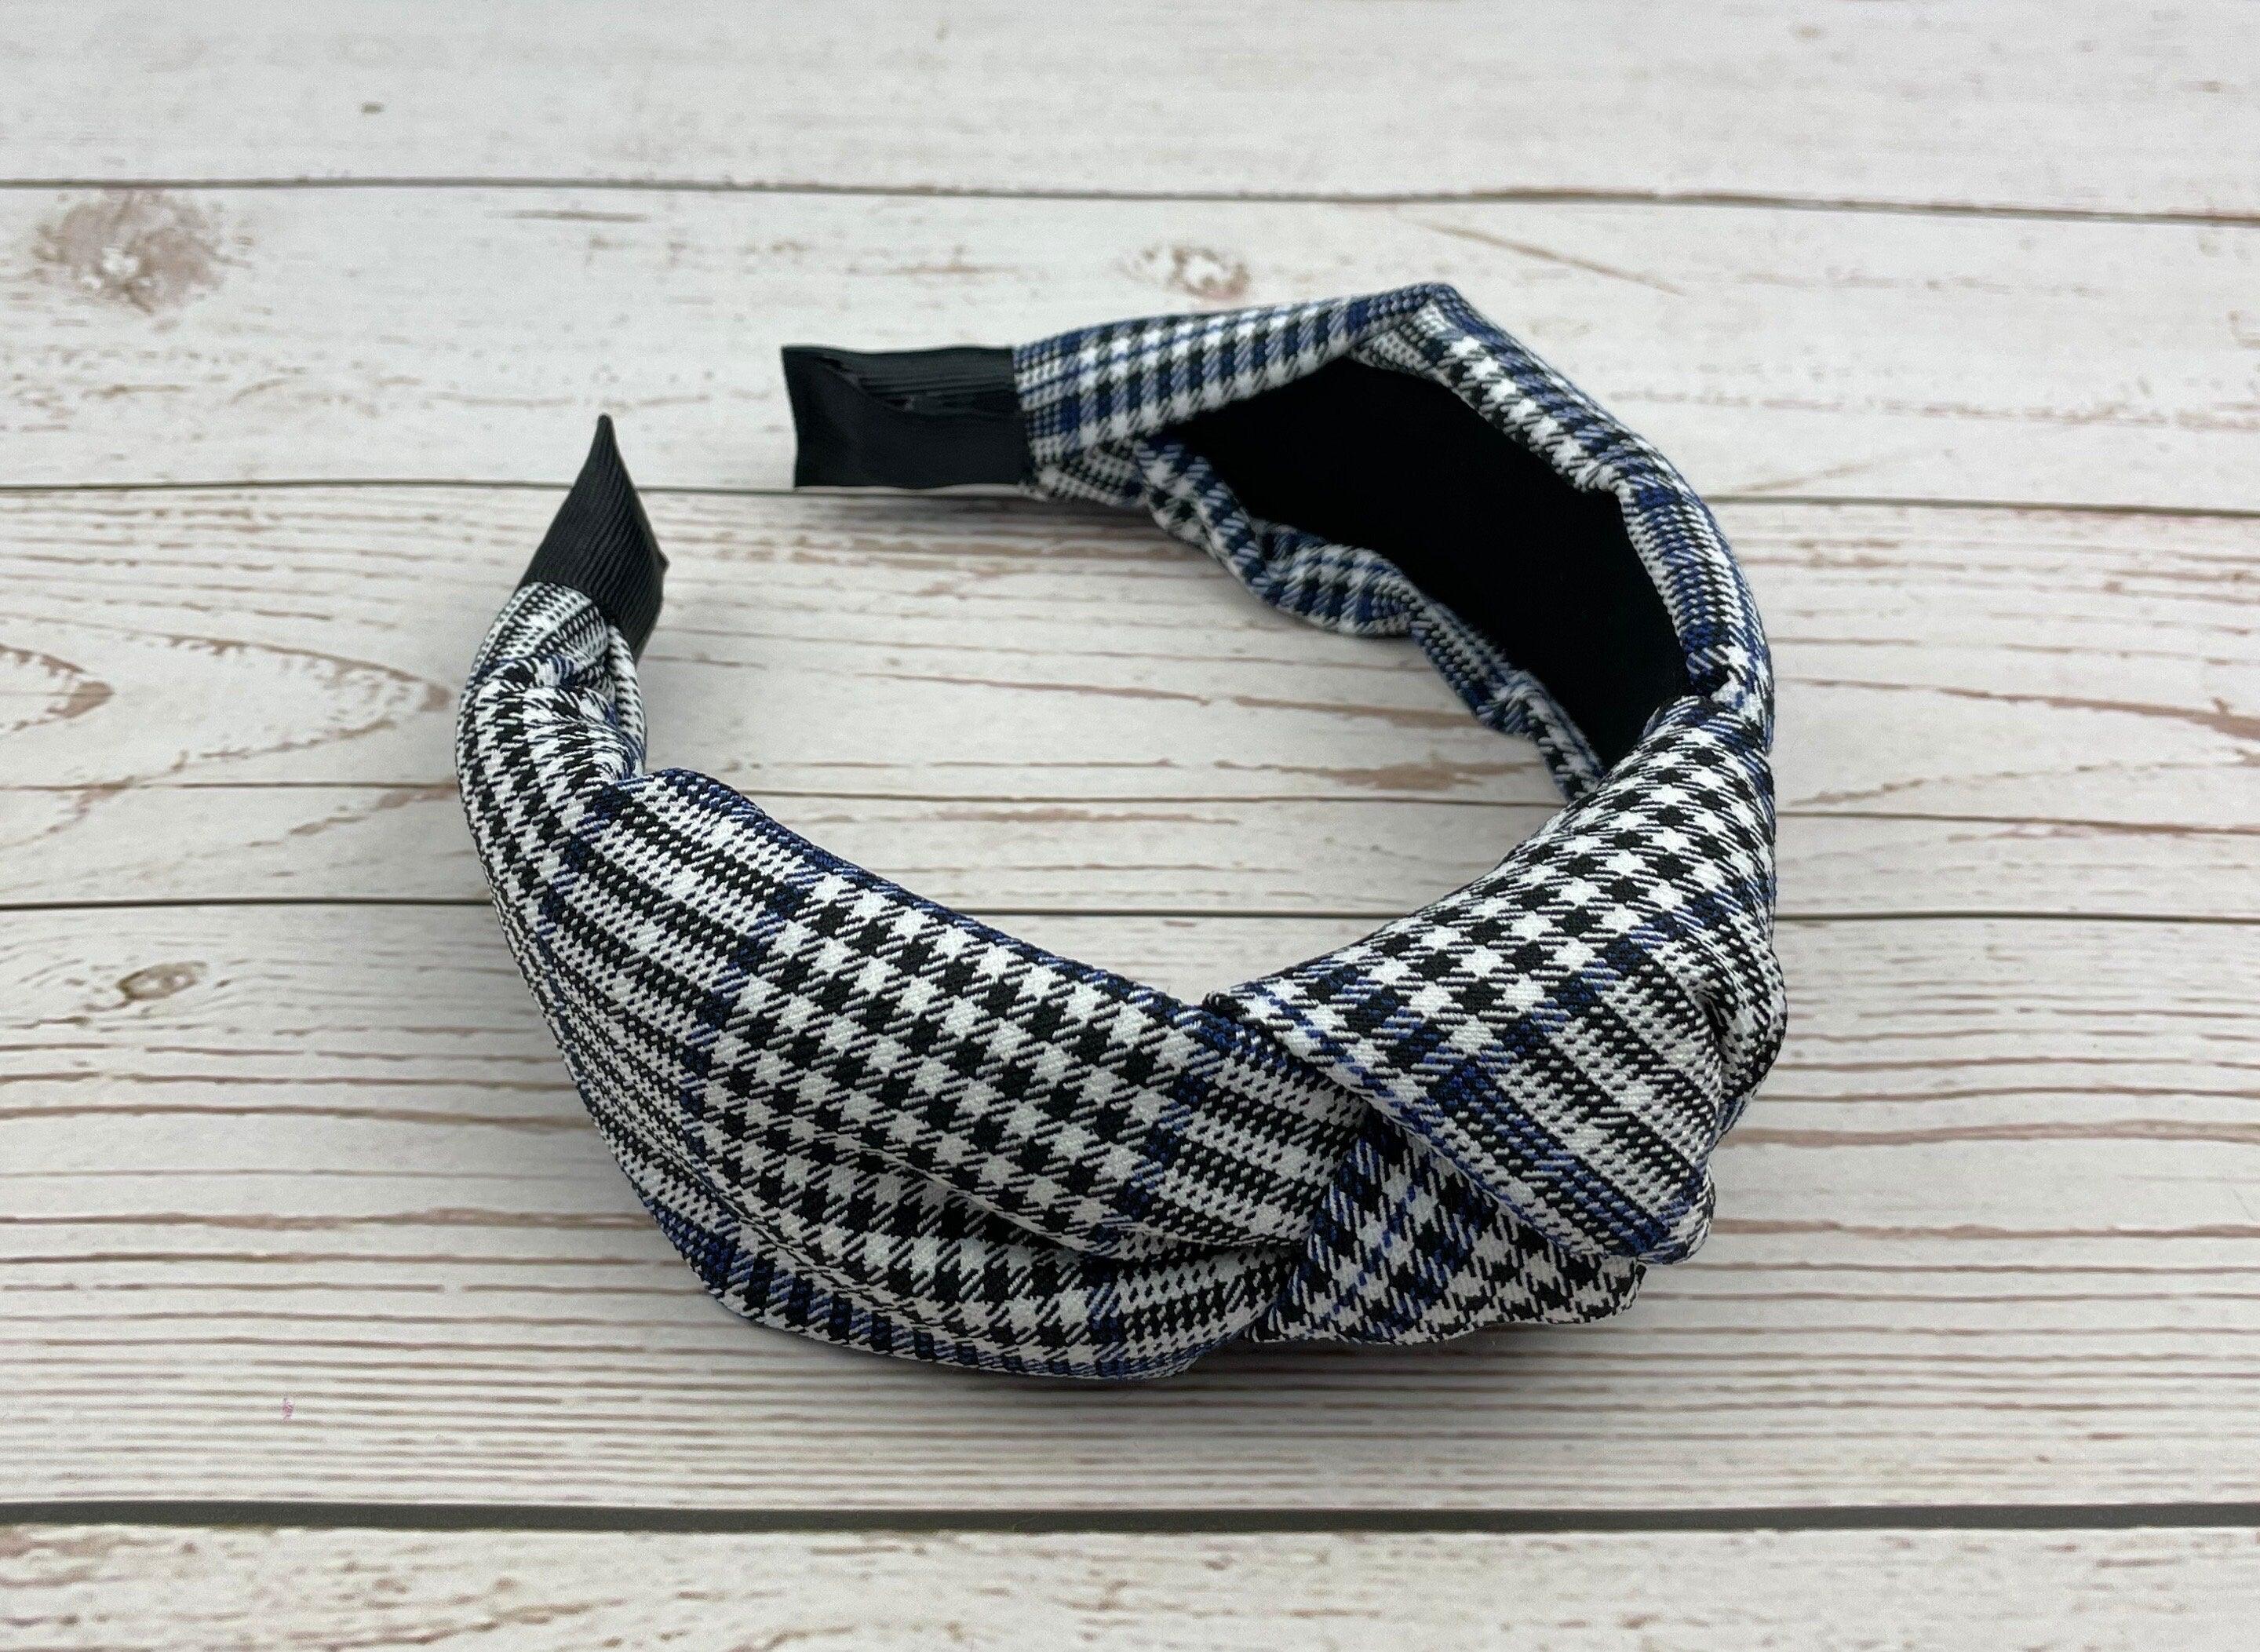 High-Quality Classic Knotted Headband in Crepe White and Black with Dark Blue Stripes - Fashionable Hair Accessory for Women, Perfect for College available at Moyoni Design